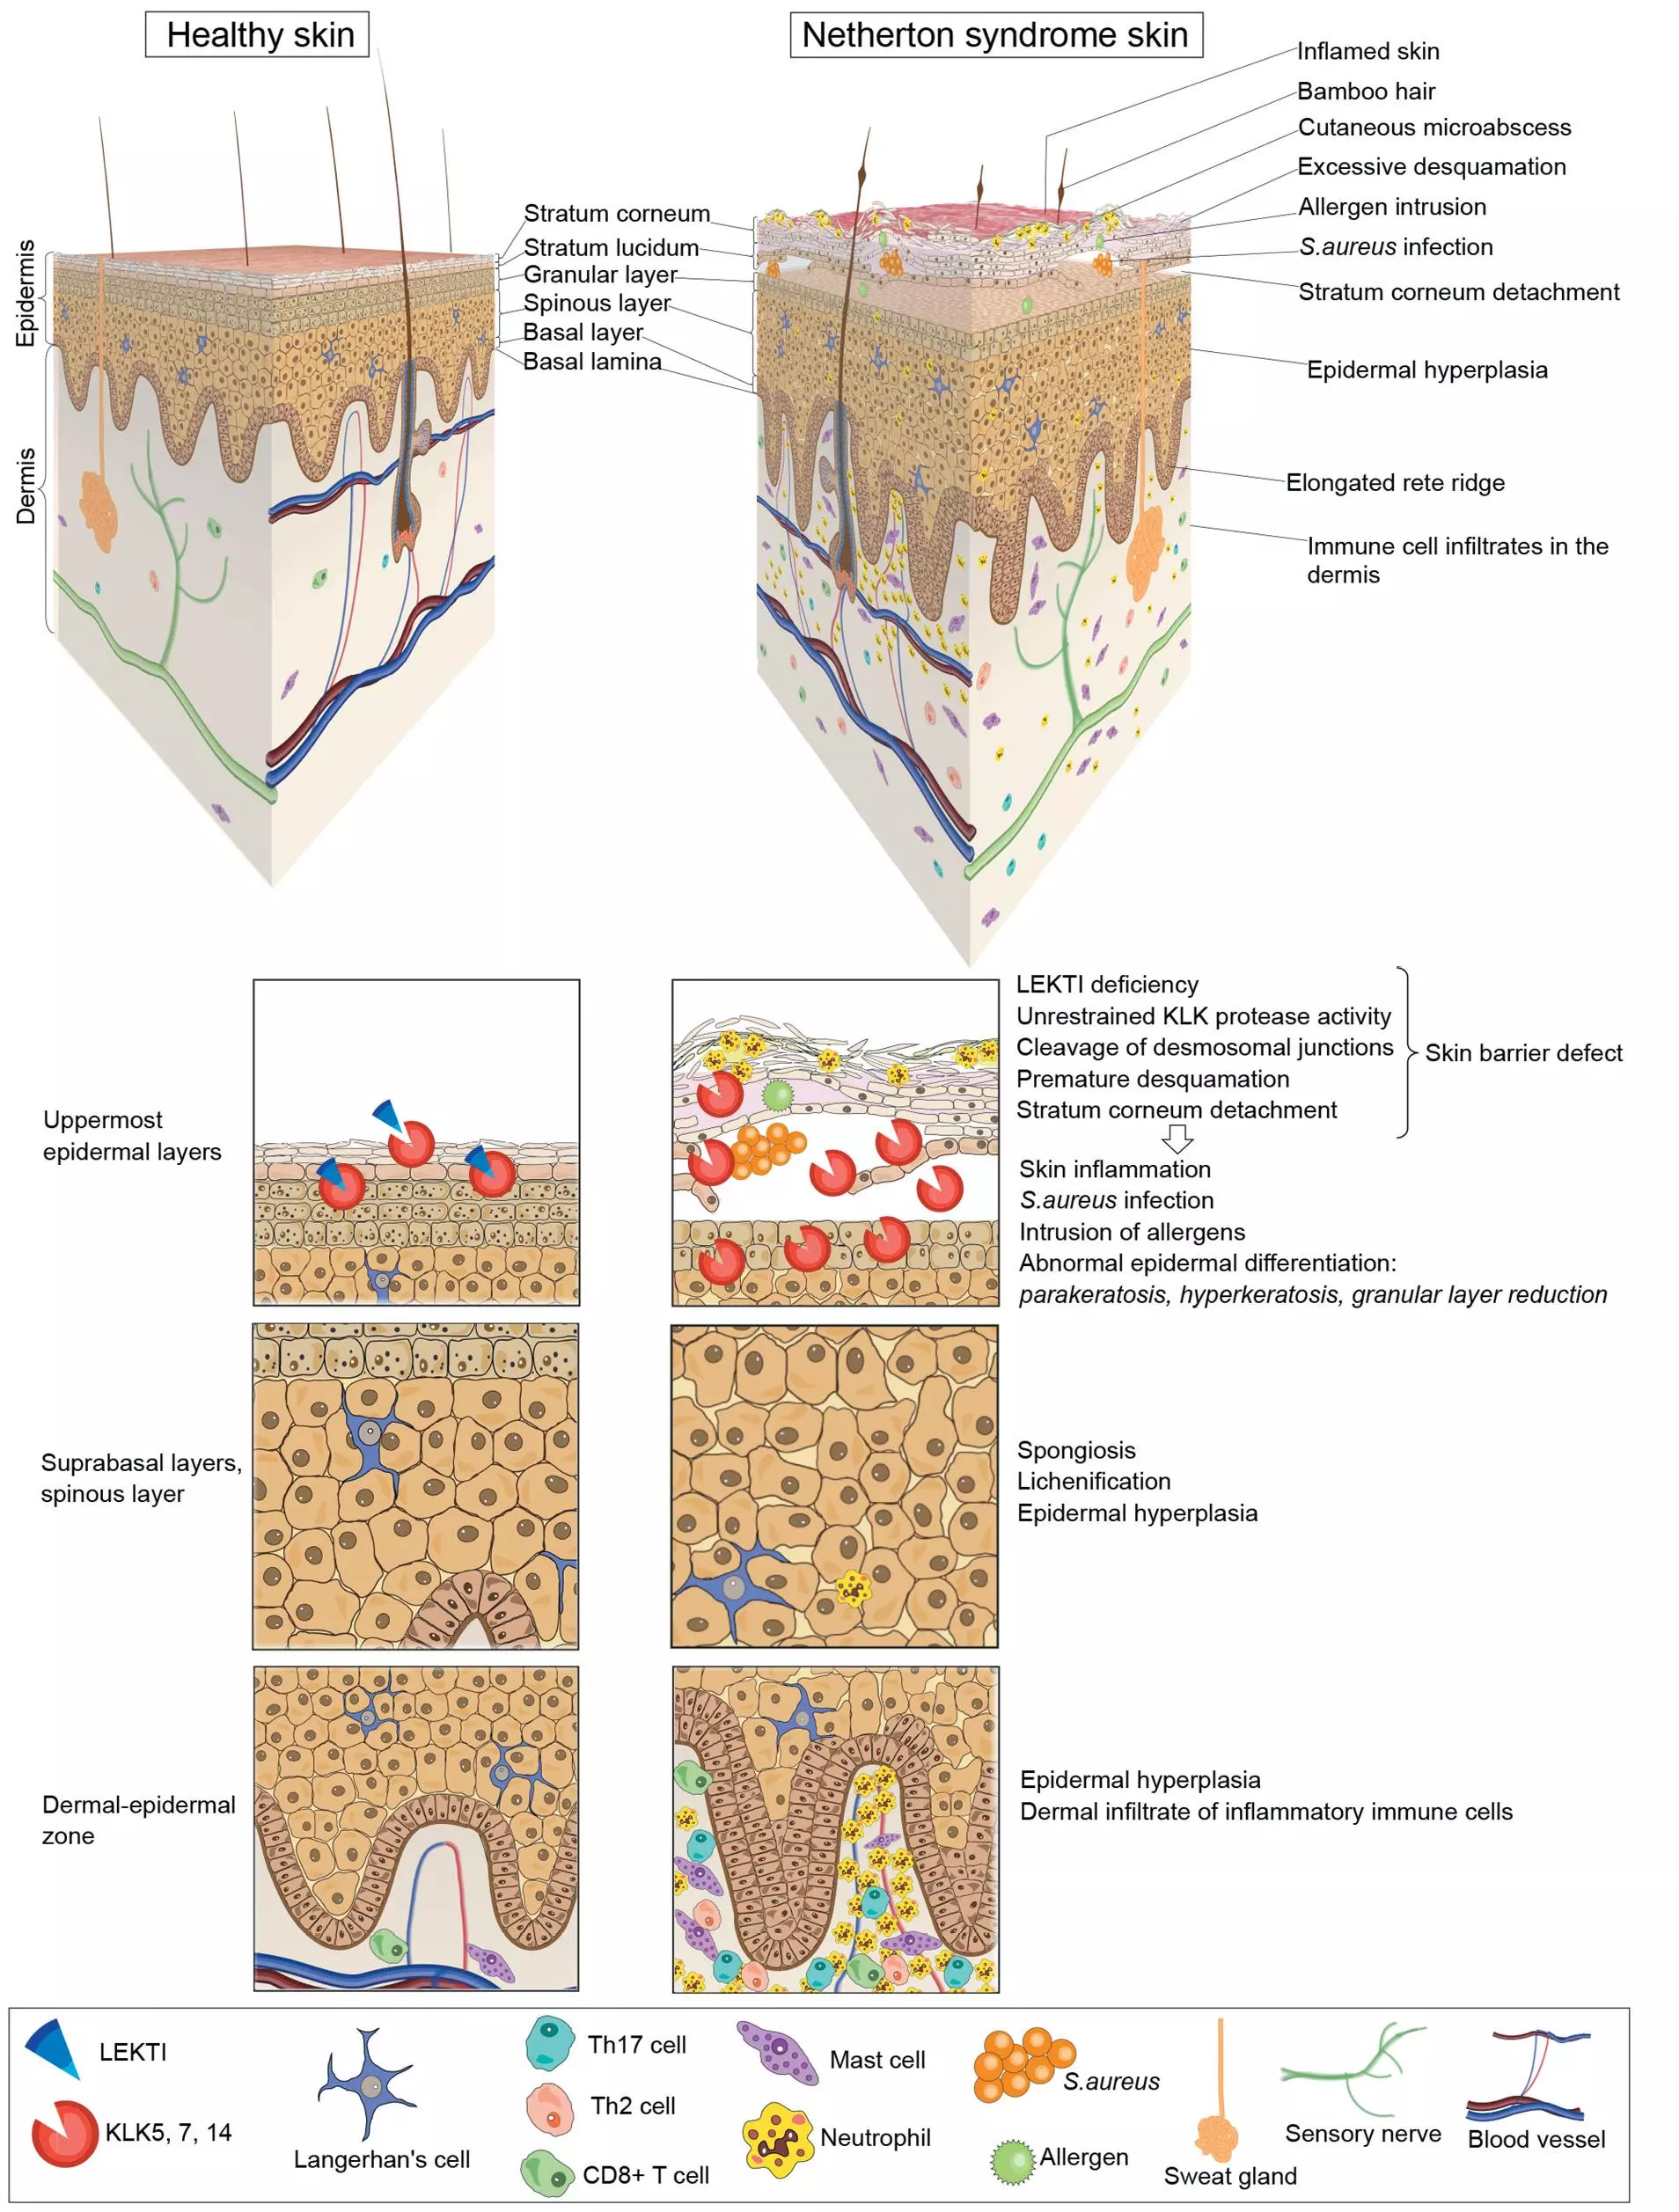 Cellular and histopathological hallmarks of NS patient skin